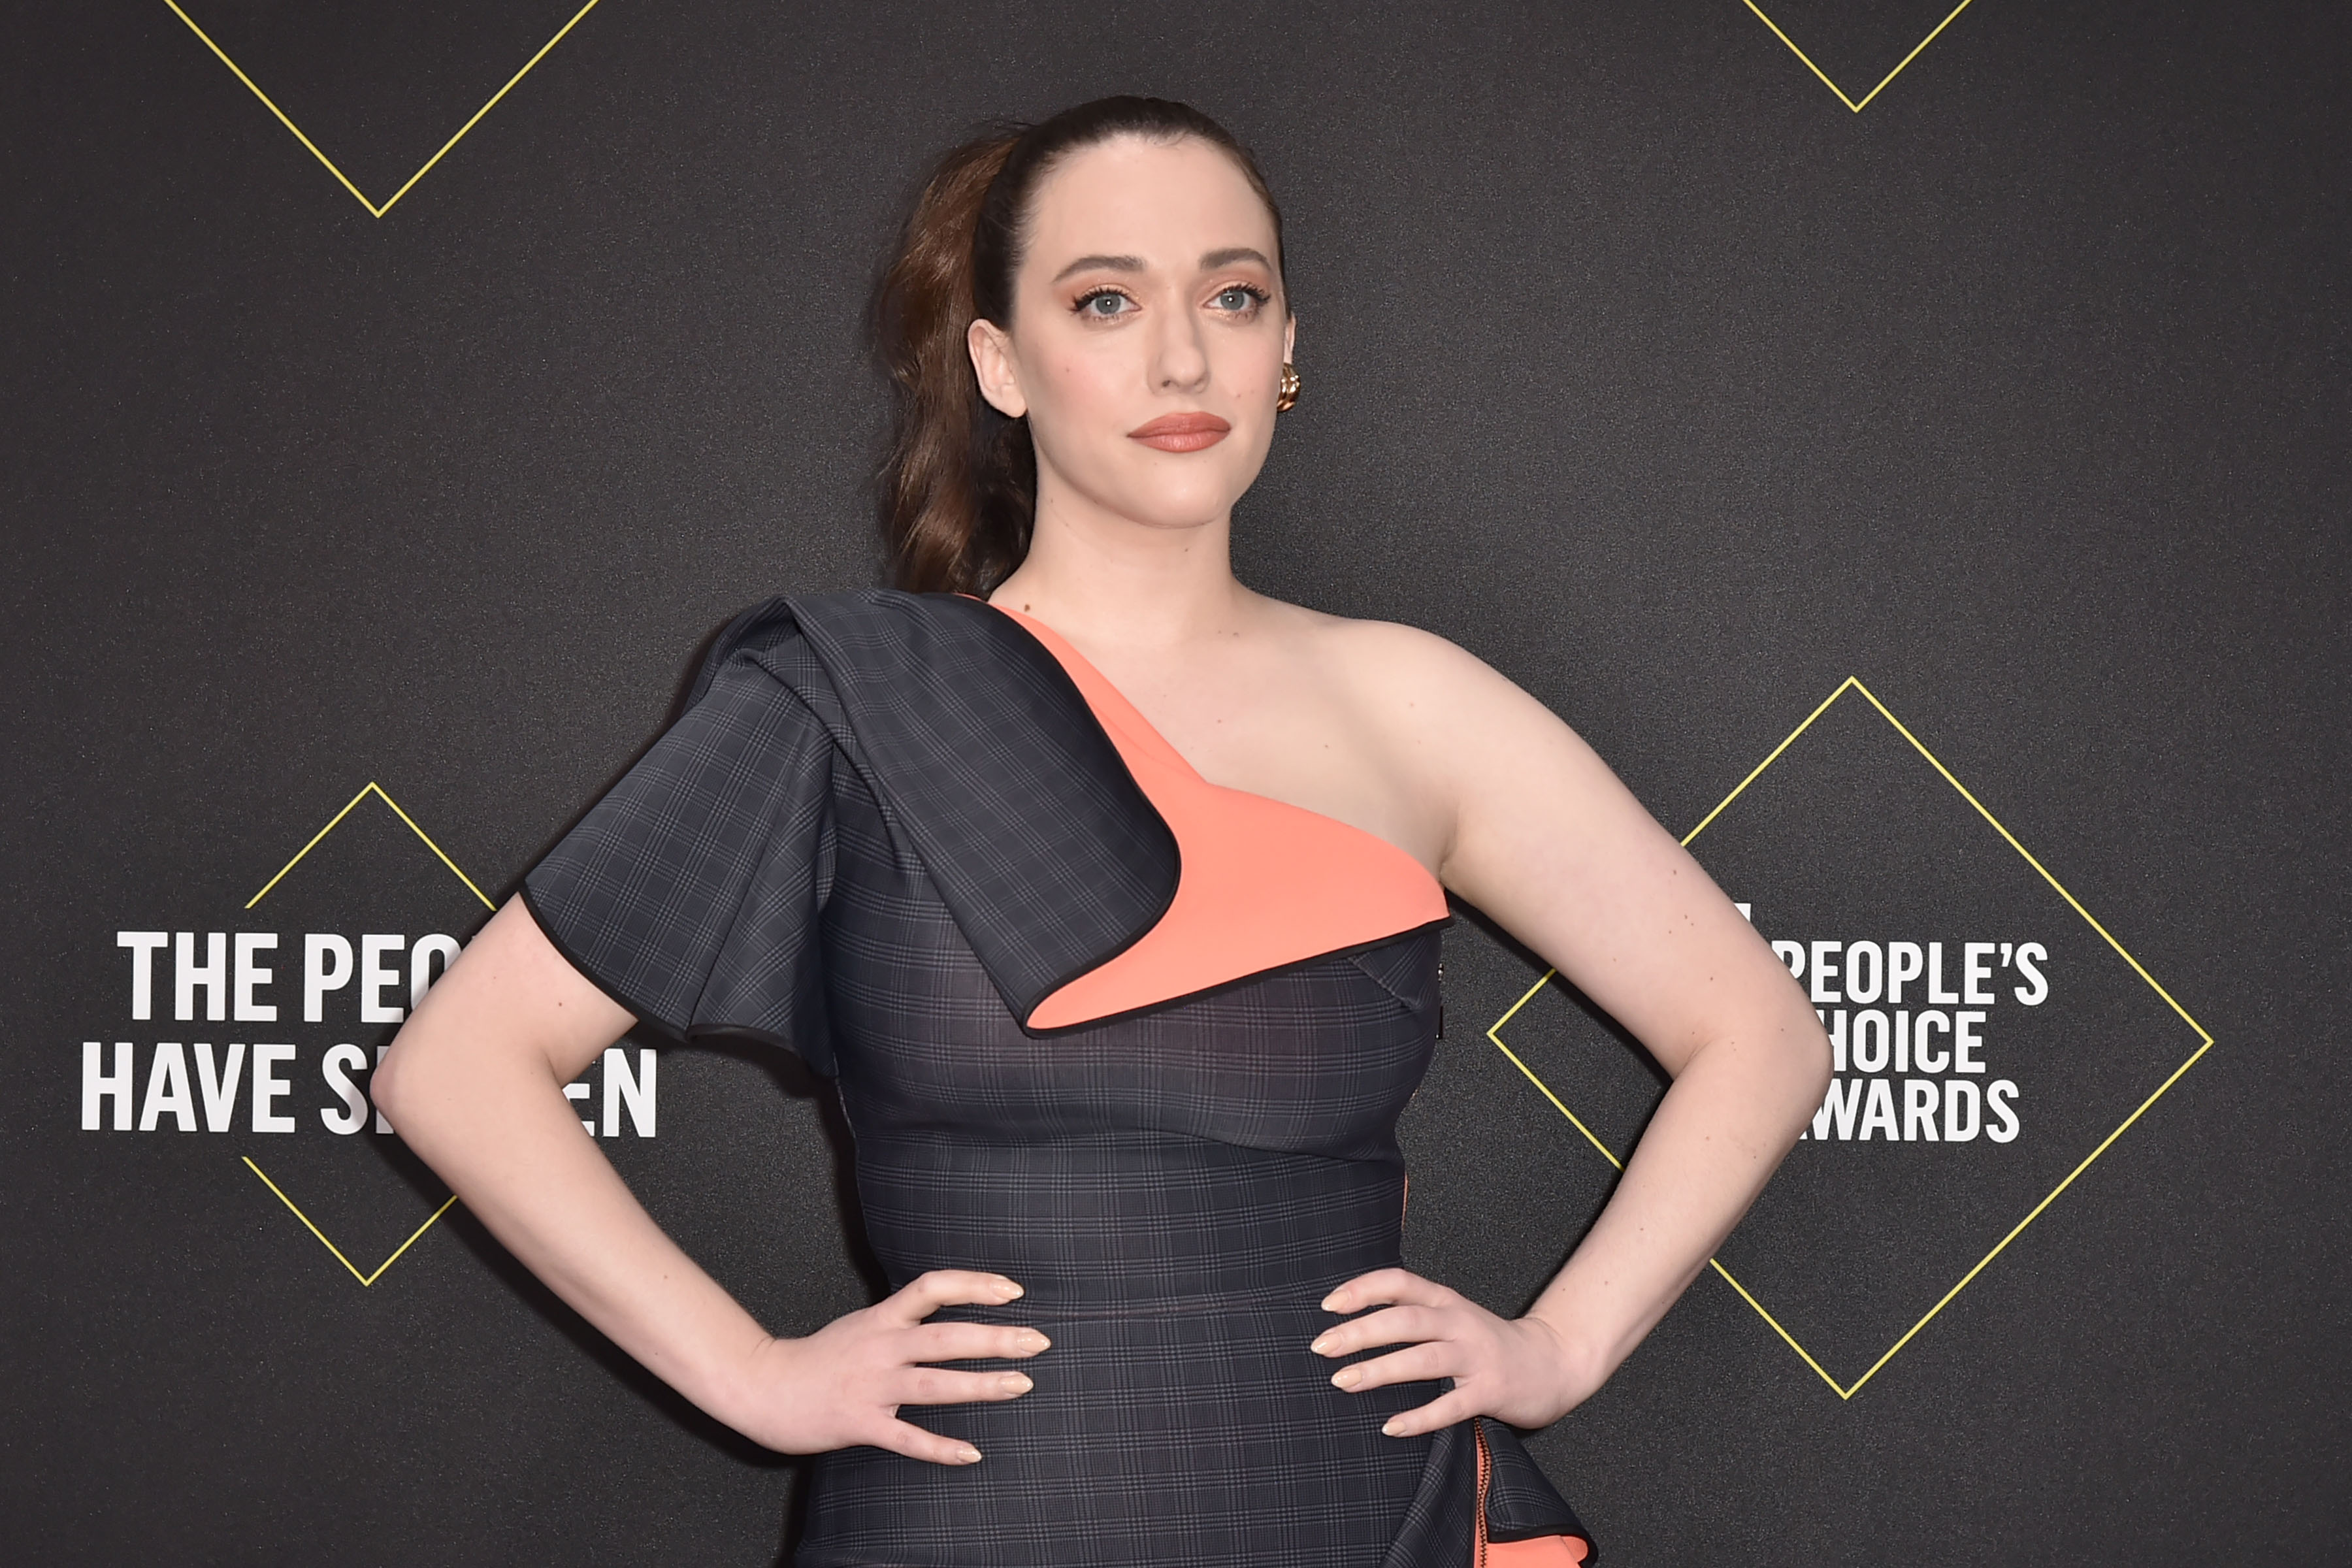 Kat Dennings attends E! People's Choice Awards in Santa Monica